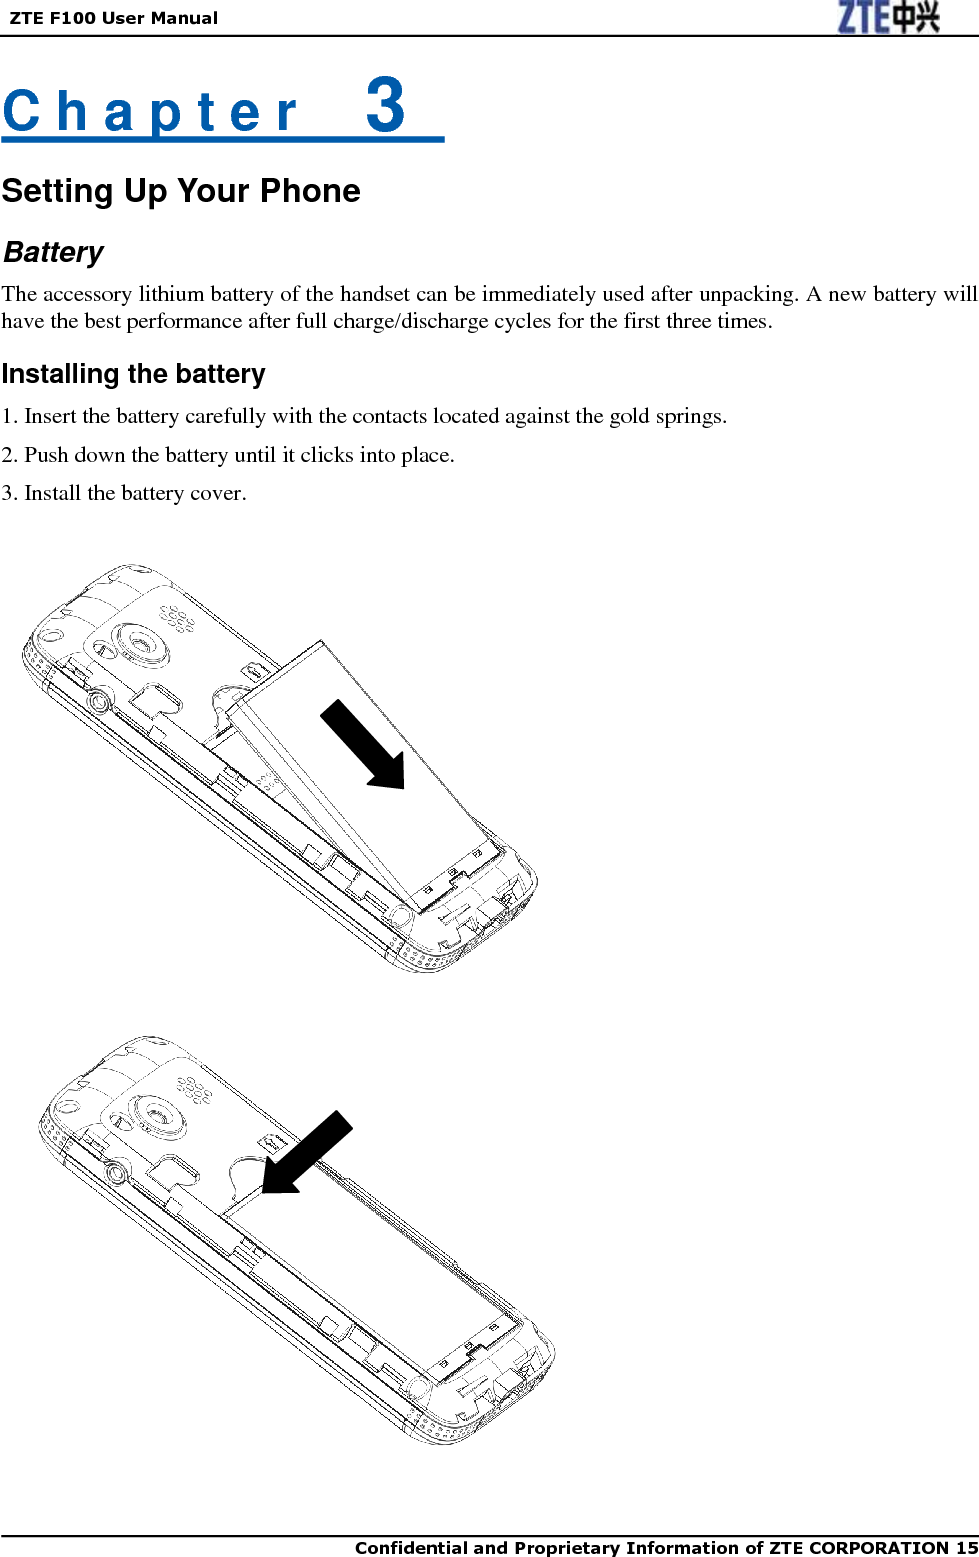   ZTE F100 User Manual    Confidential and Proprietary Information of ZTE CORPORATION 15   C h a p t e r    3   Setting Up Your Phone Battery The accessory lithium battery of the handset can be immediately used after unpacking. A new battery will have the best performance after full charge/discharge cycles for the first three times. Installing the battery 1. Insert the battery carefully with the contacts located against the gold springs. 2. Push down the battery until it clicks into place. 3. Install the battery cover.                            